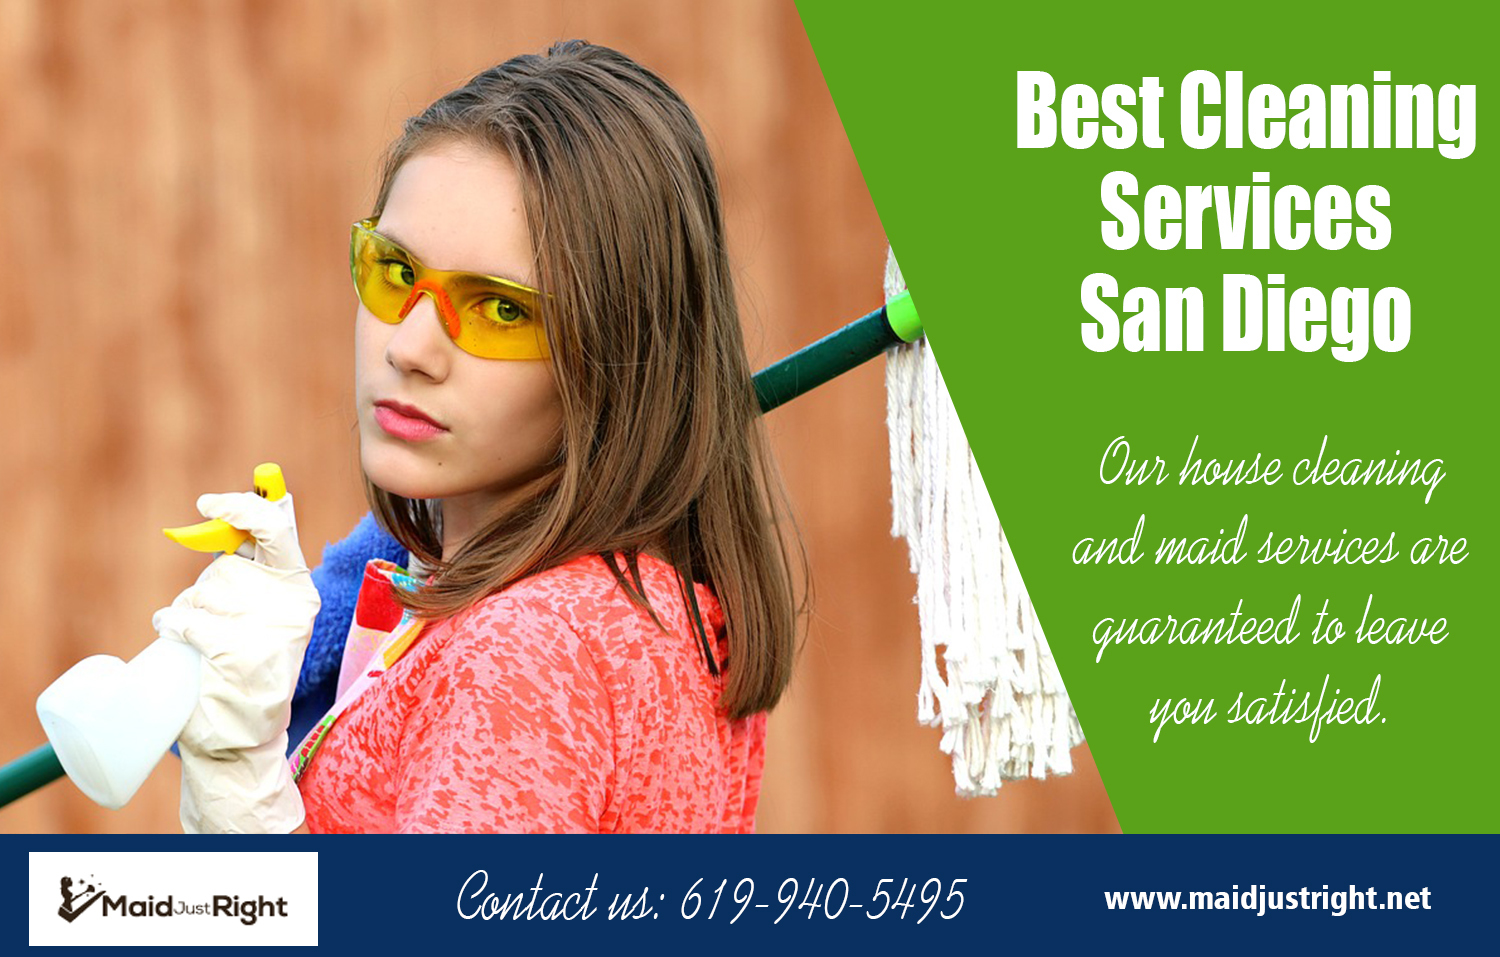 Best Cleaning Services San Diego | Call Us - 619-940-5495 | maidjustright.net